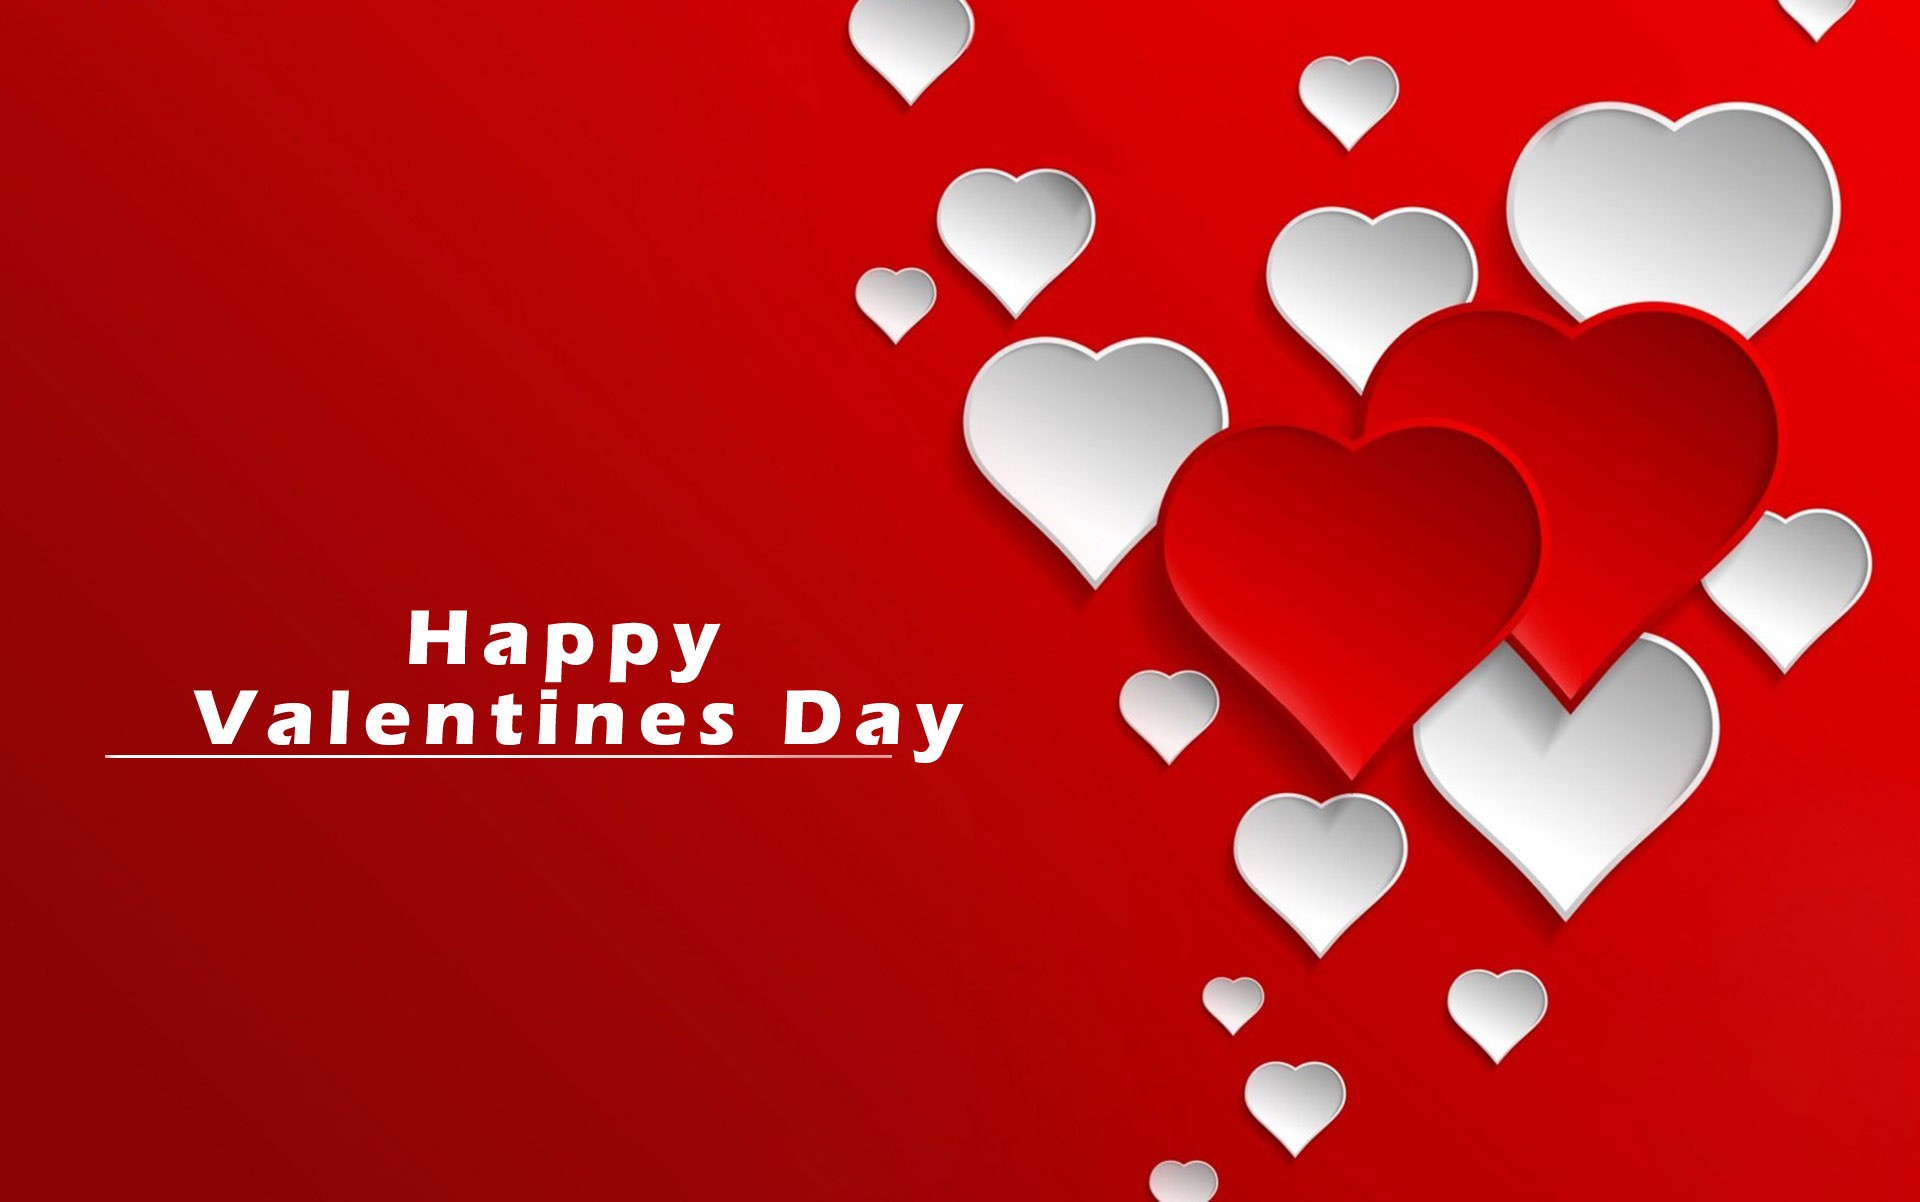 Happy Valentines Day Image HD 3d Wallpaper